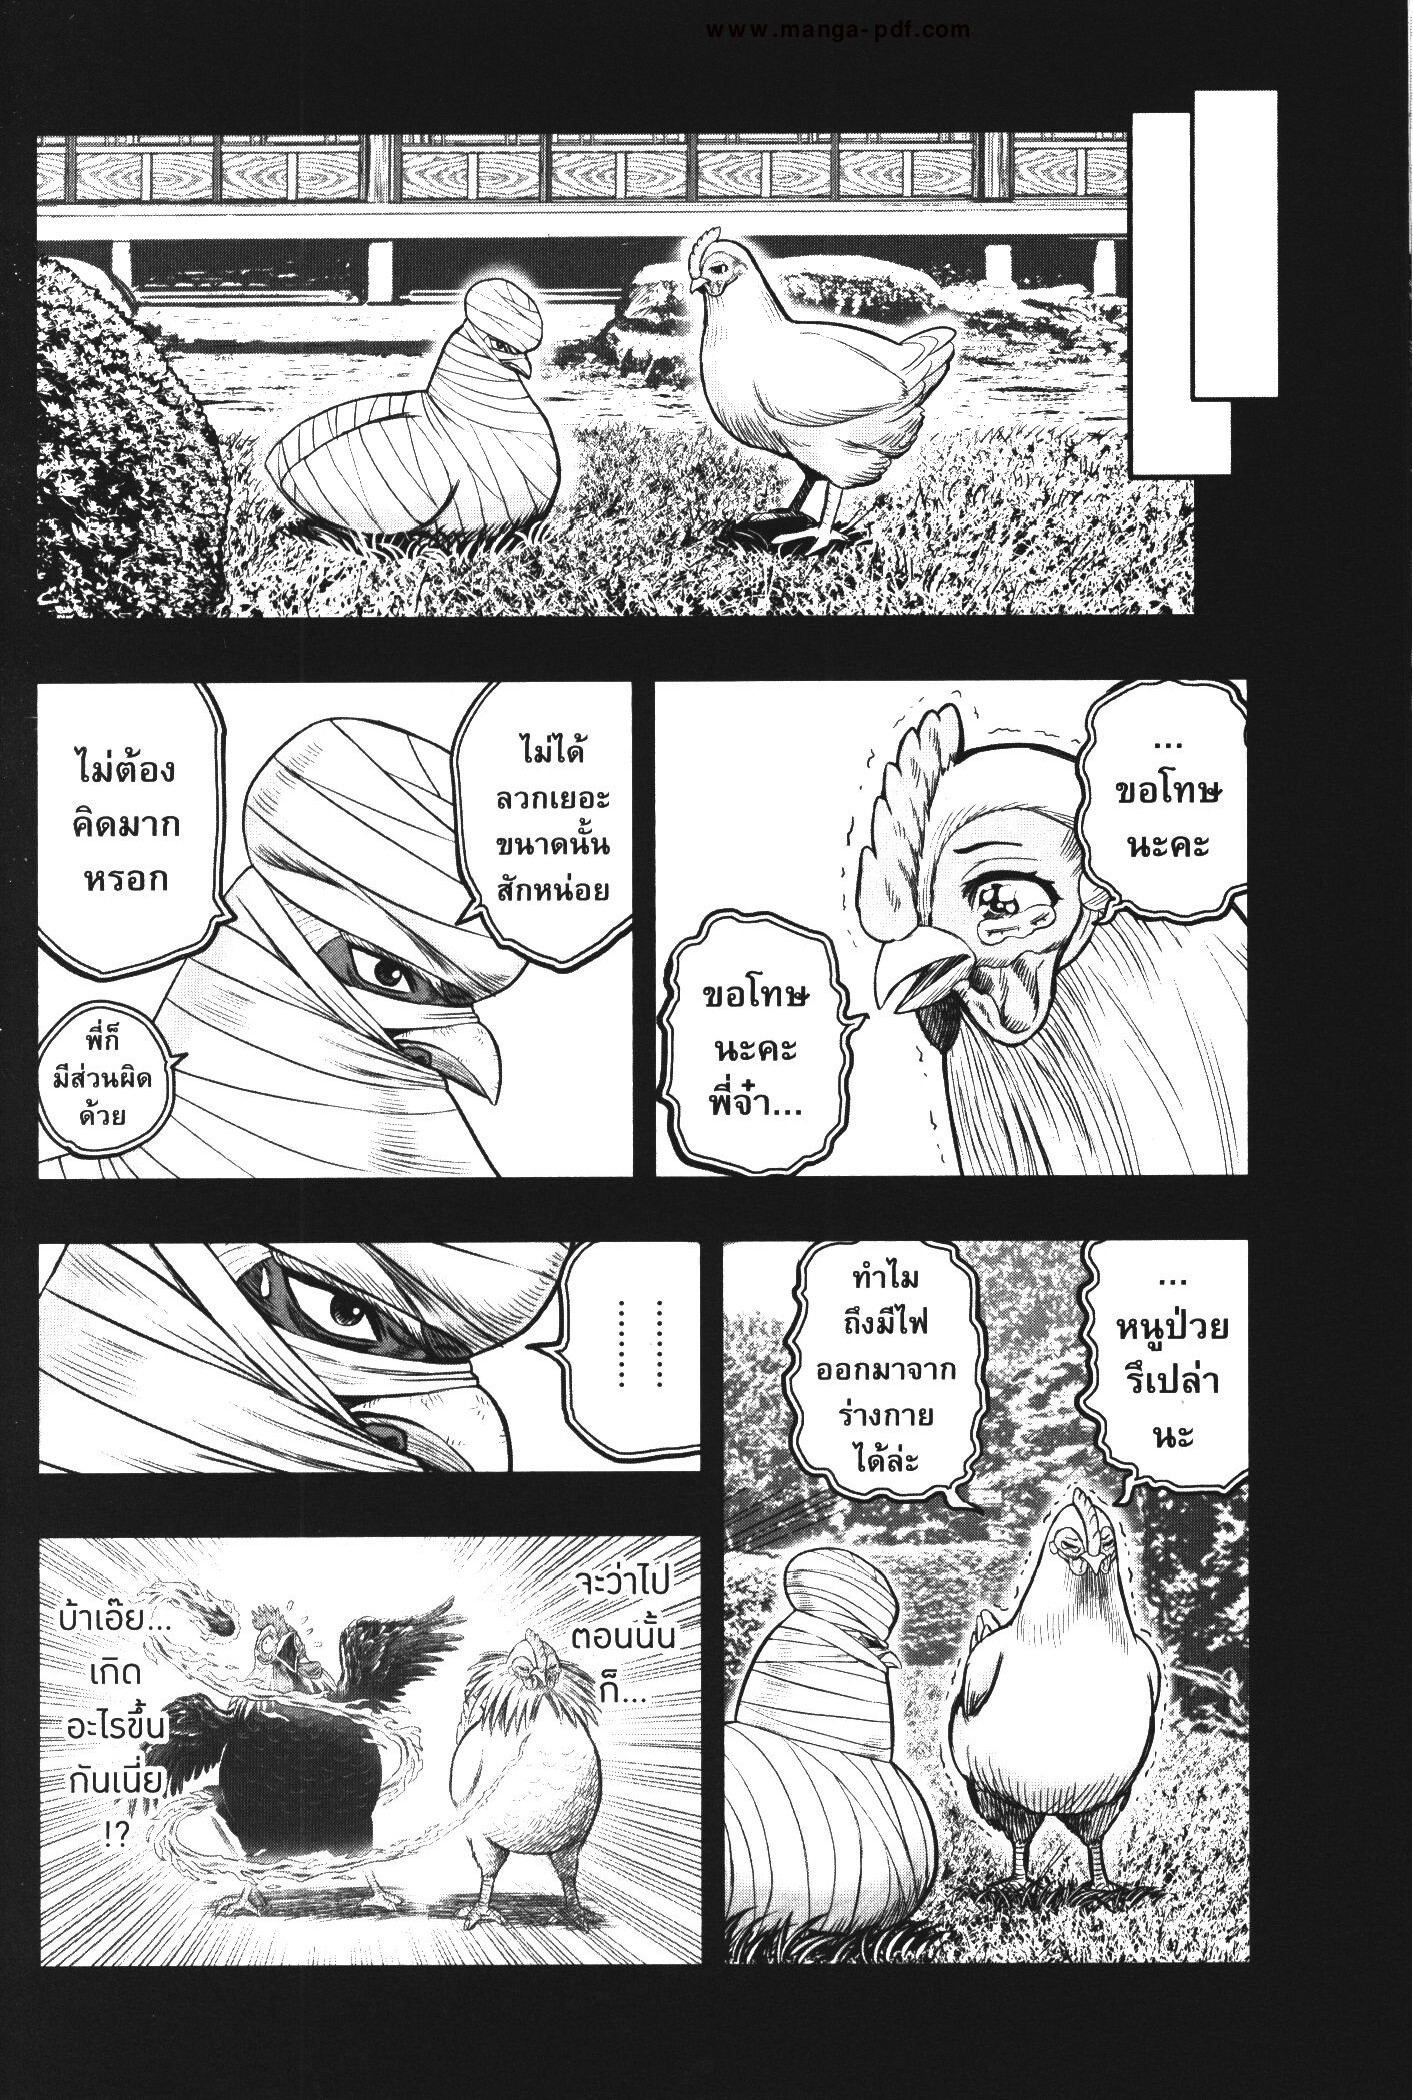 Rooster Fighter 17 (6)